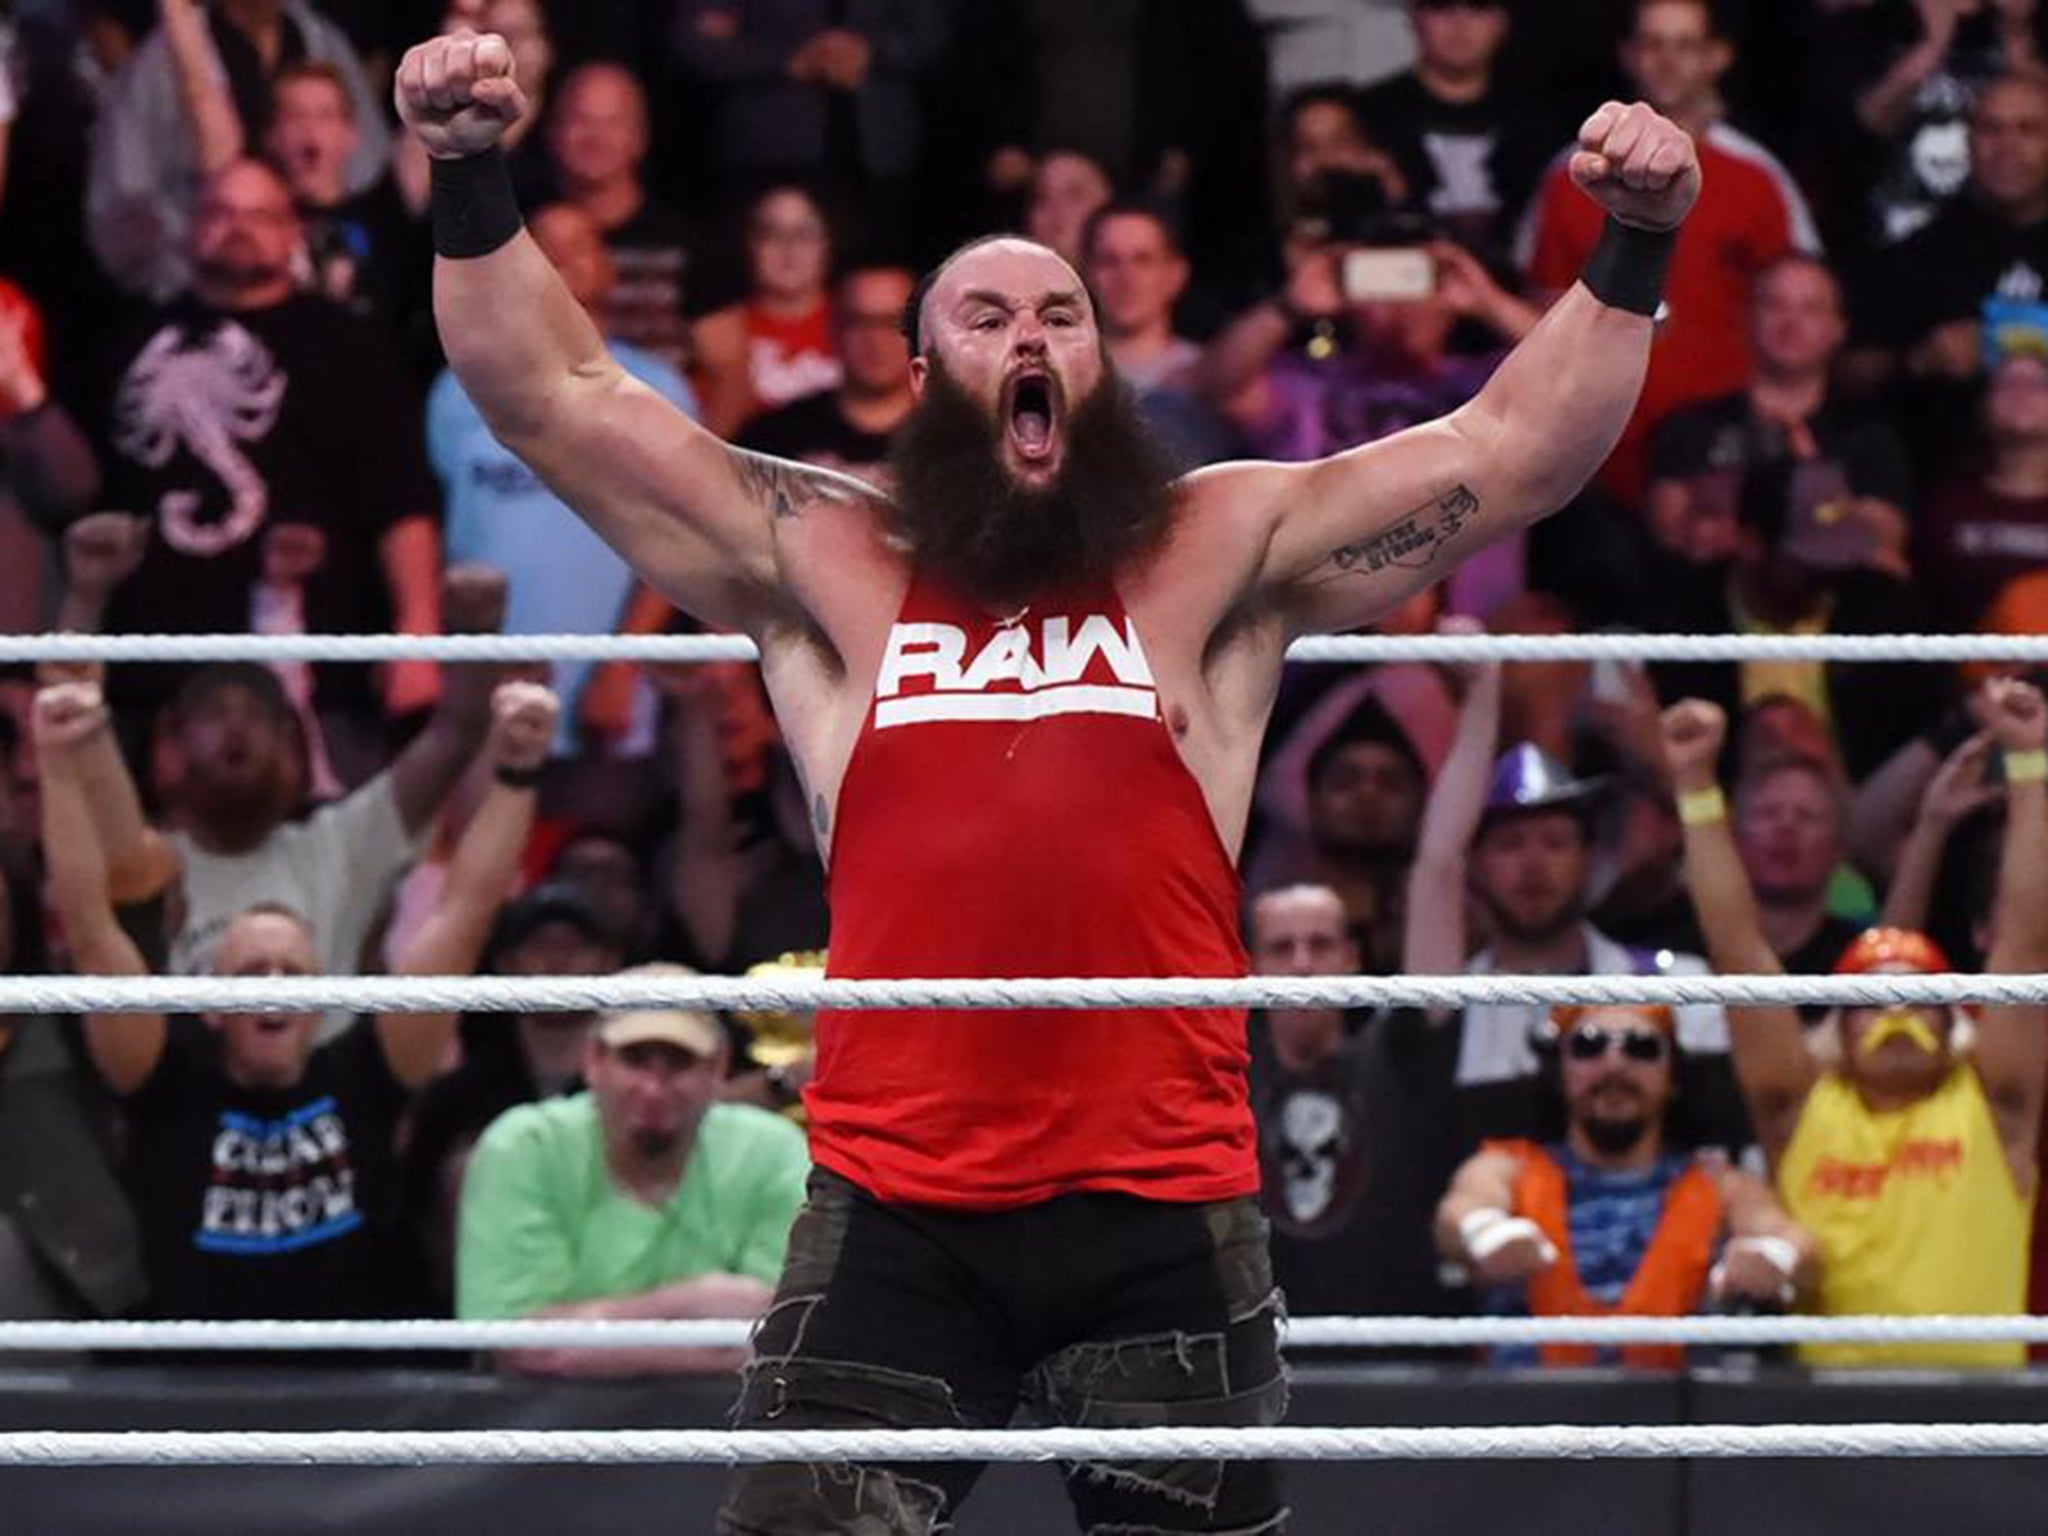 Braun Strowman was left standing on his own after turning on Triple H